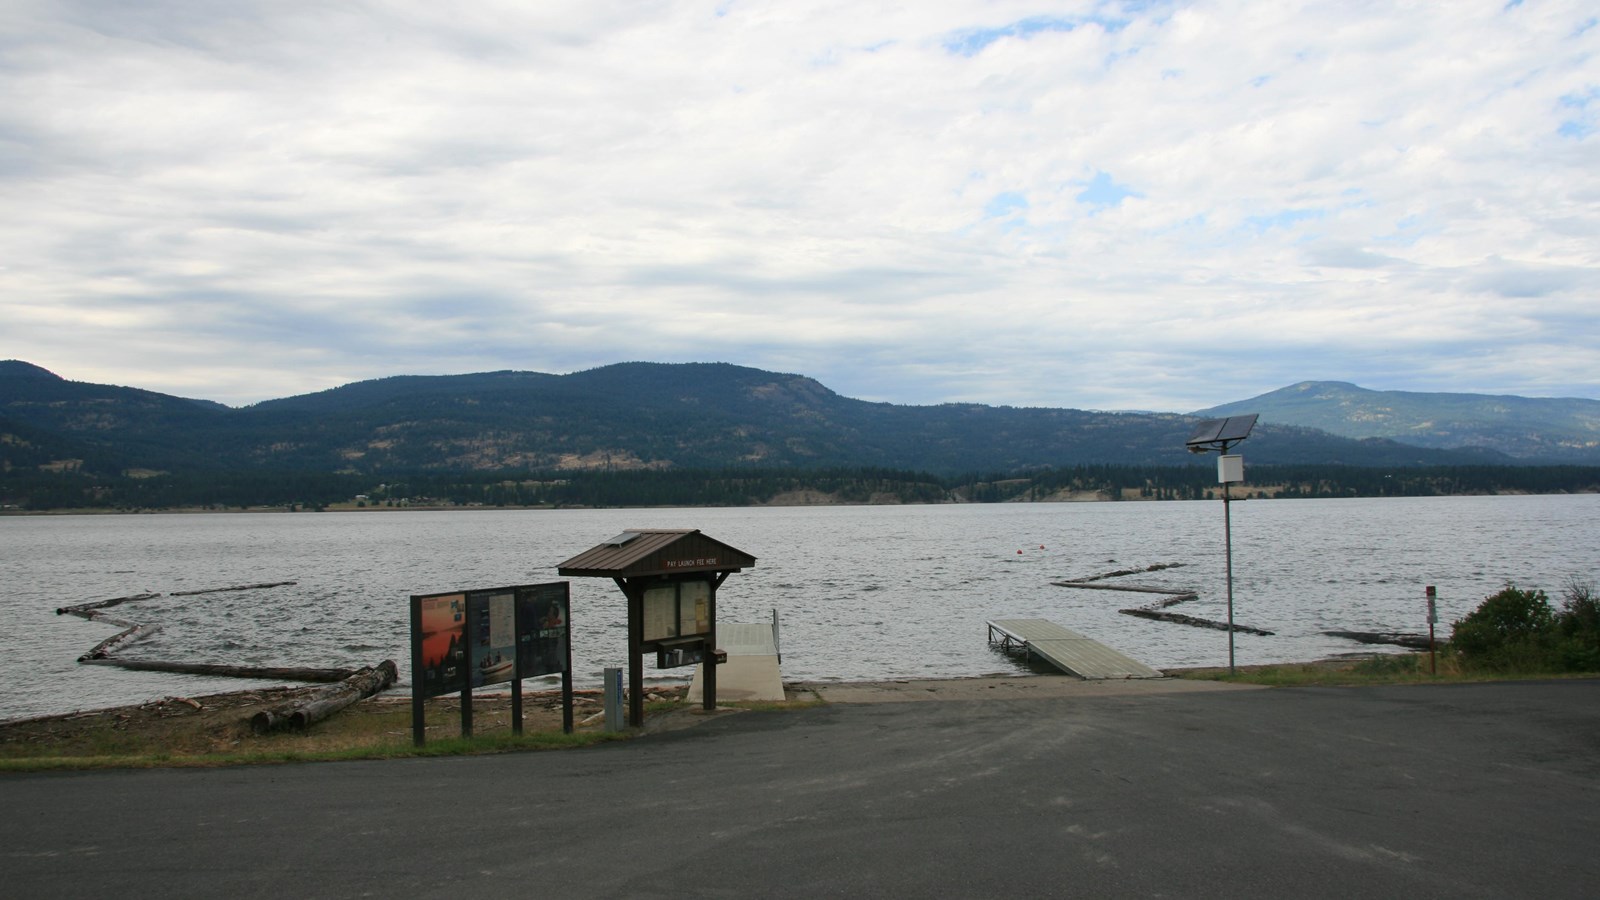 The paved parking area leads to the boat ramp, with the information kiosk directly adjacent.